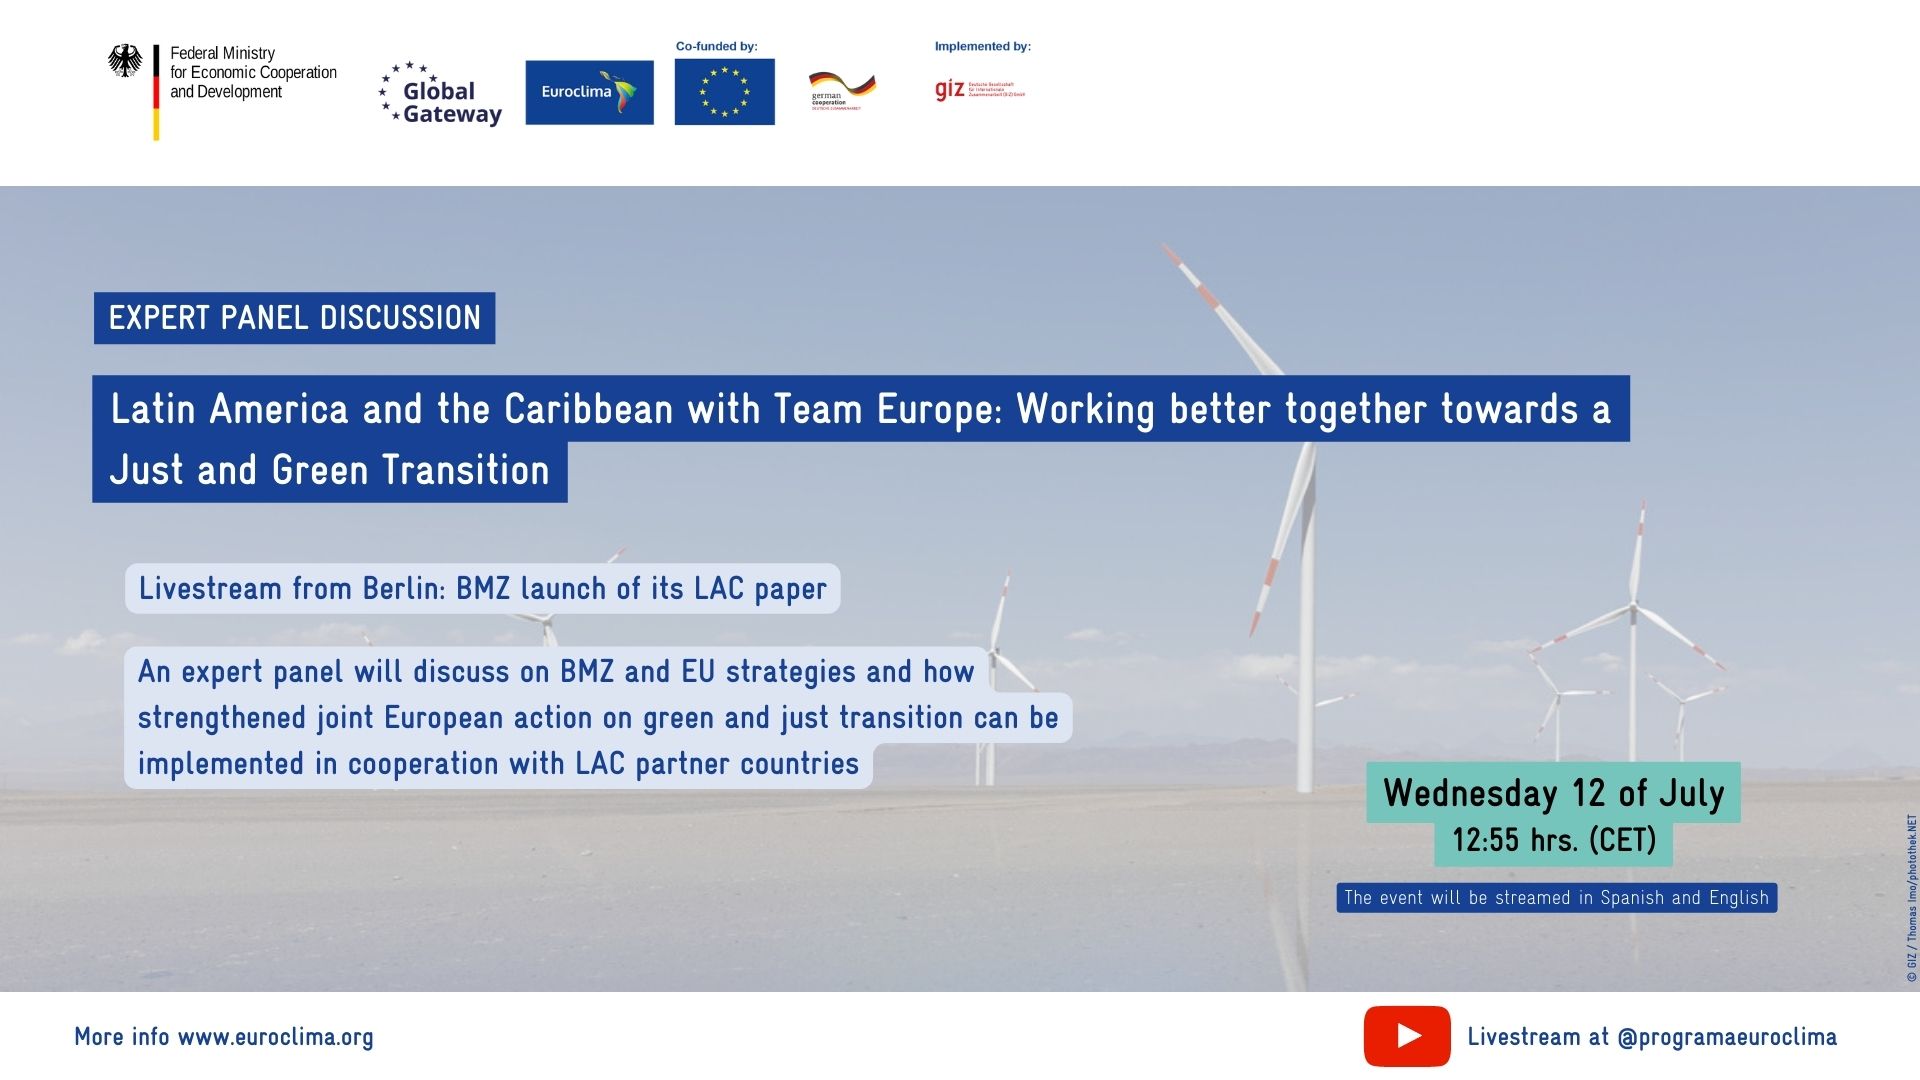 Latin America and the Caribbean with Team Europe: Working better together towards a Just and Green Transition